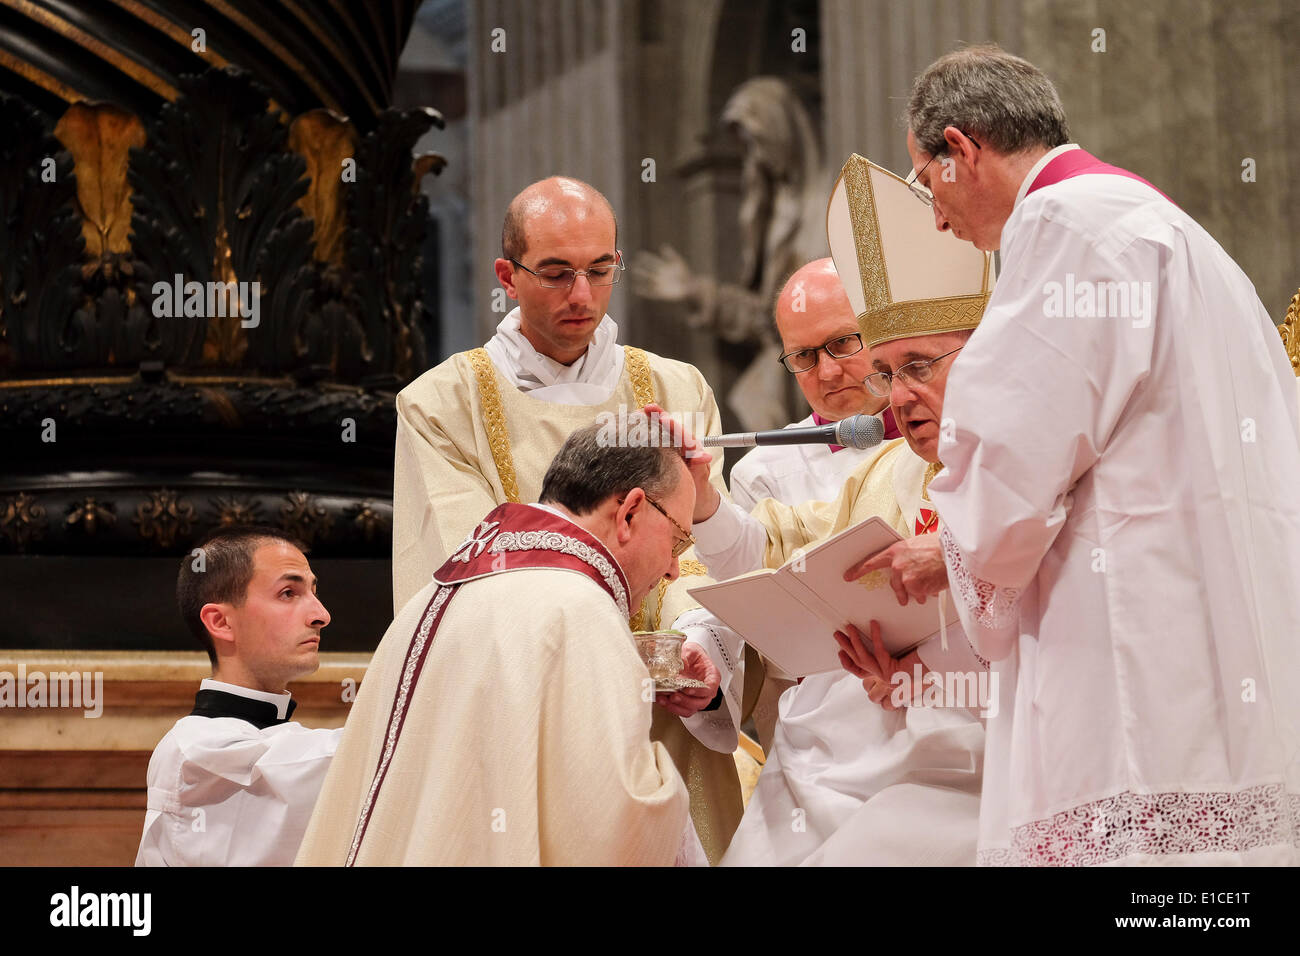 Vatican City. 30th May 2014. Pope Francis - Episcopal Ordination SE Fabio Fabene, Secretary of the Synod of Bishops - Credit:  Realy Easy Star/Alamy Live News Stock Photo